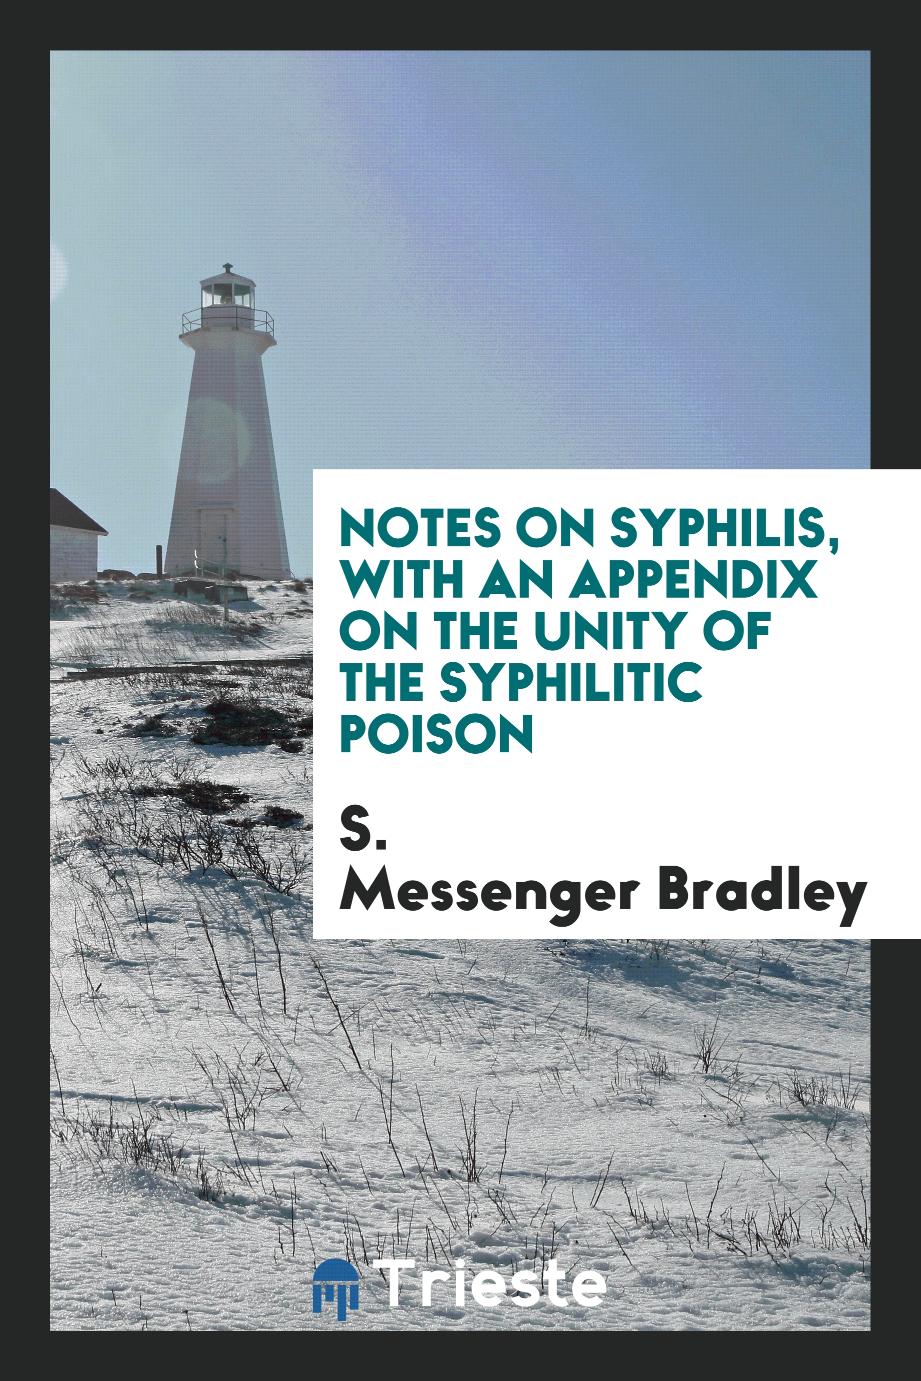 Notes on syphilis, with an appendix on the unity of the syphilitic poison